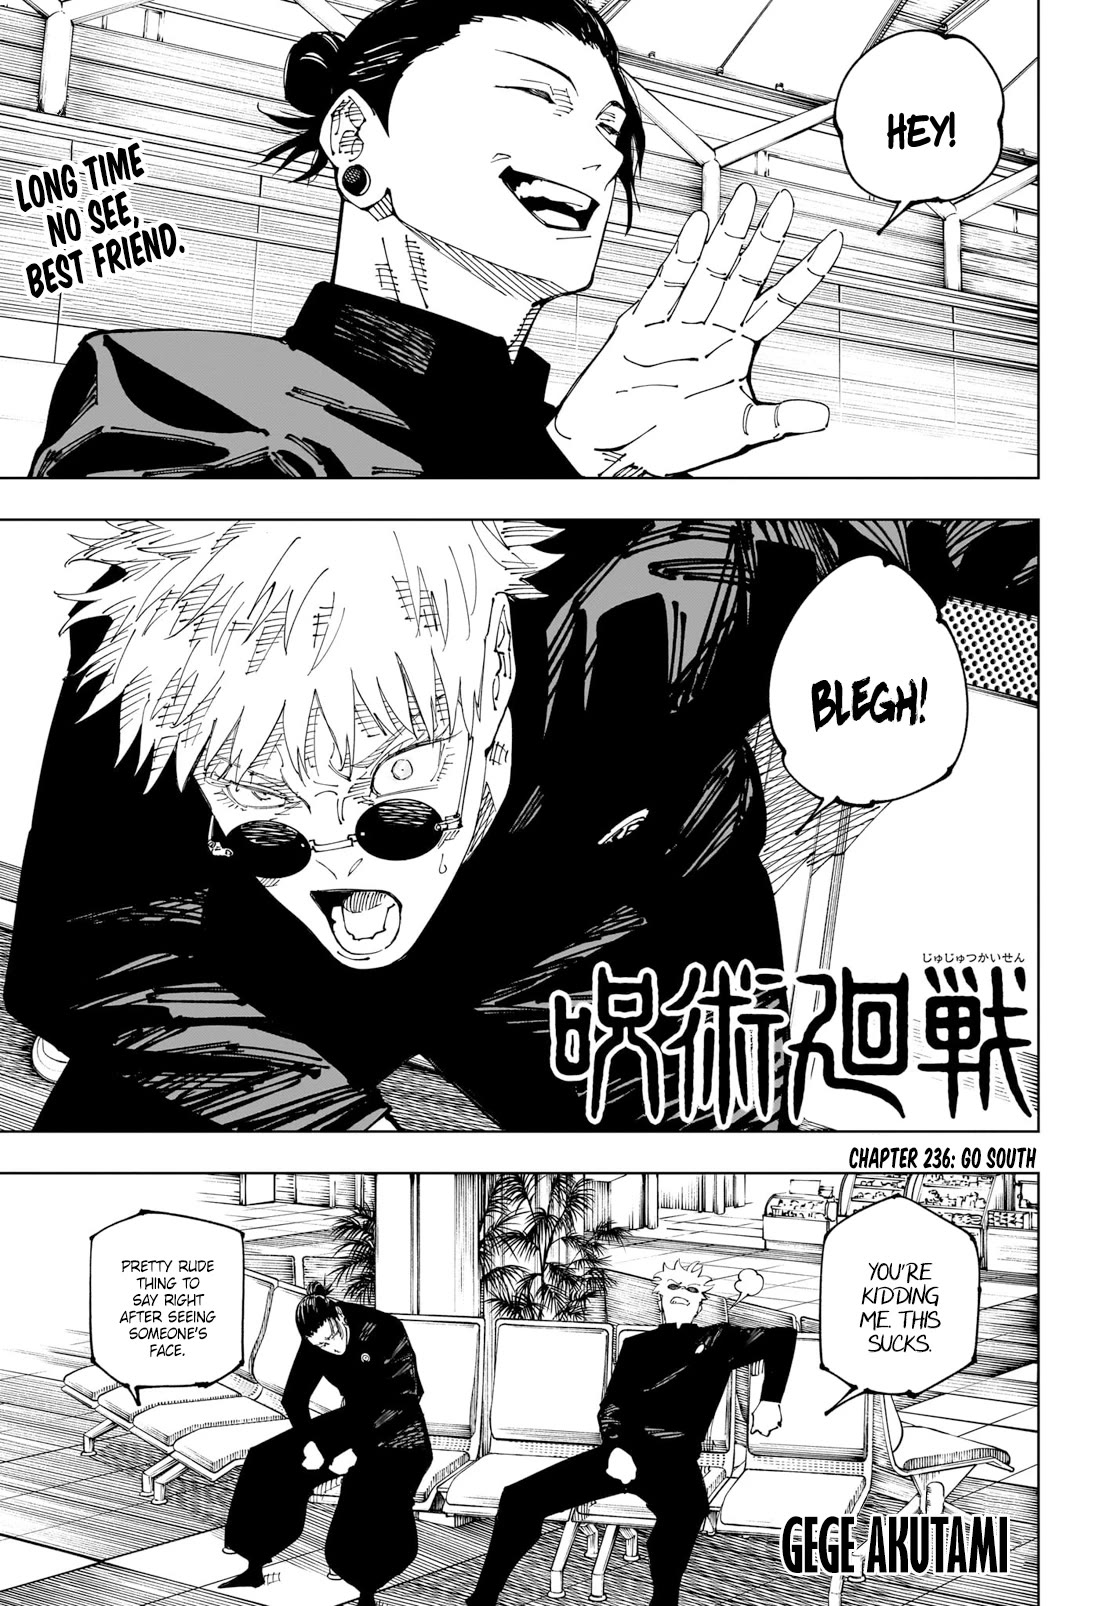 Jujutsu Kaisen Chapter 236: Go South - Picture 1